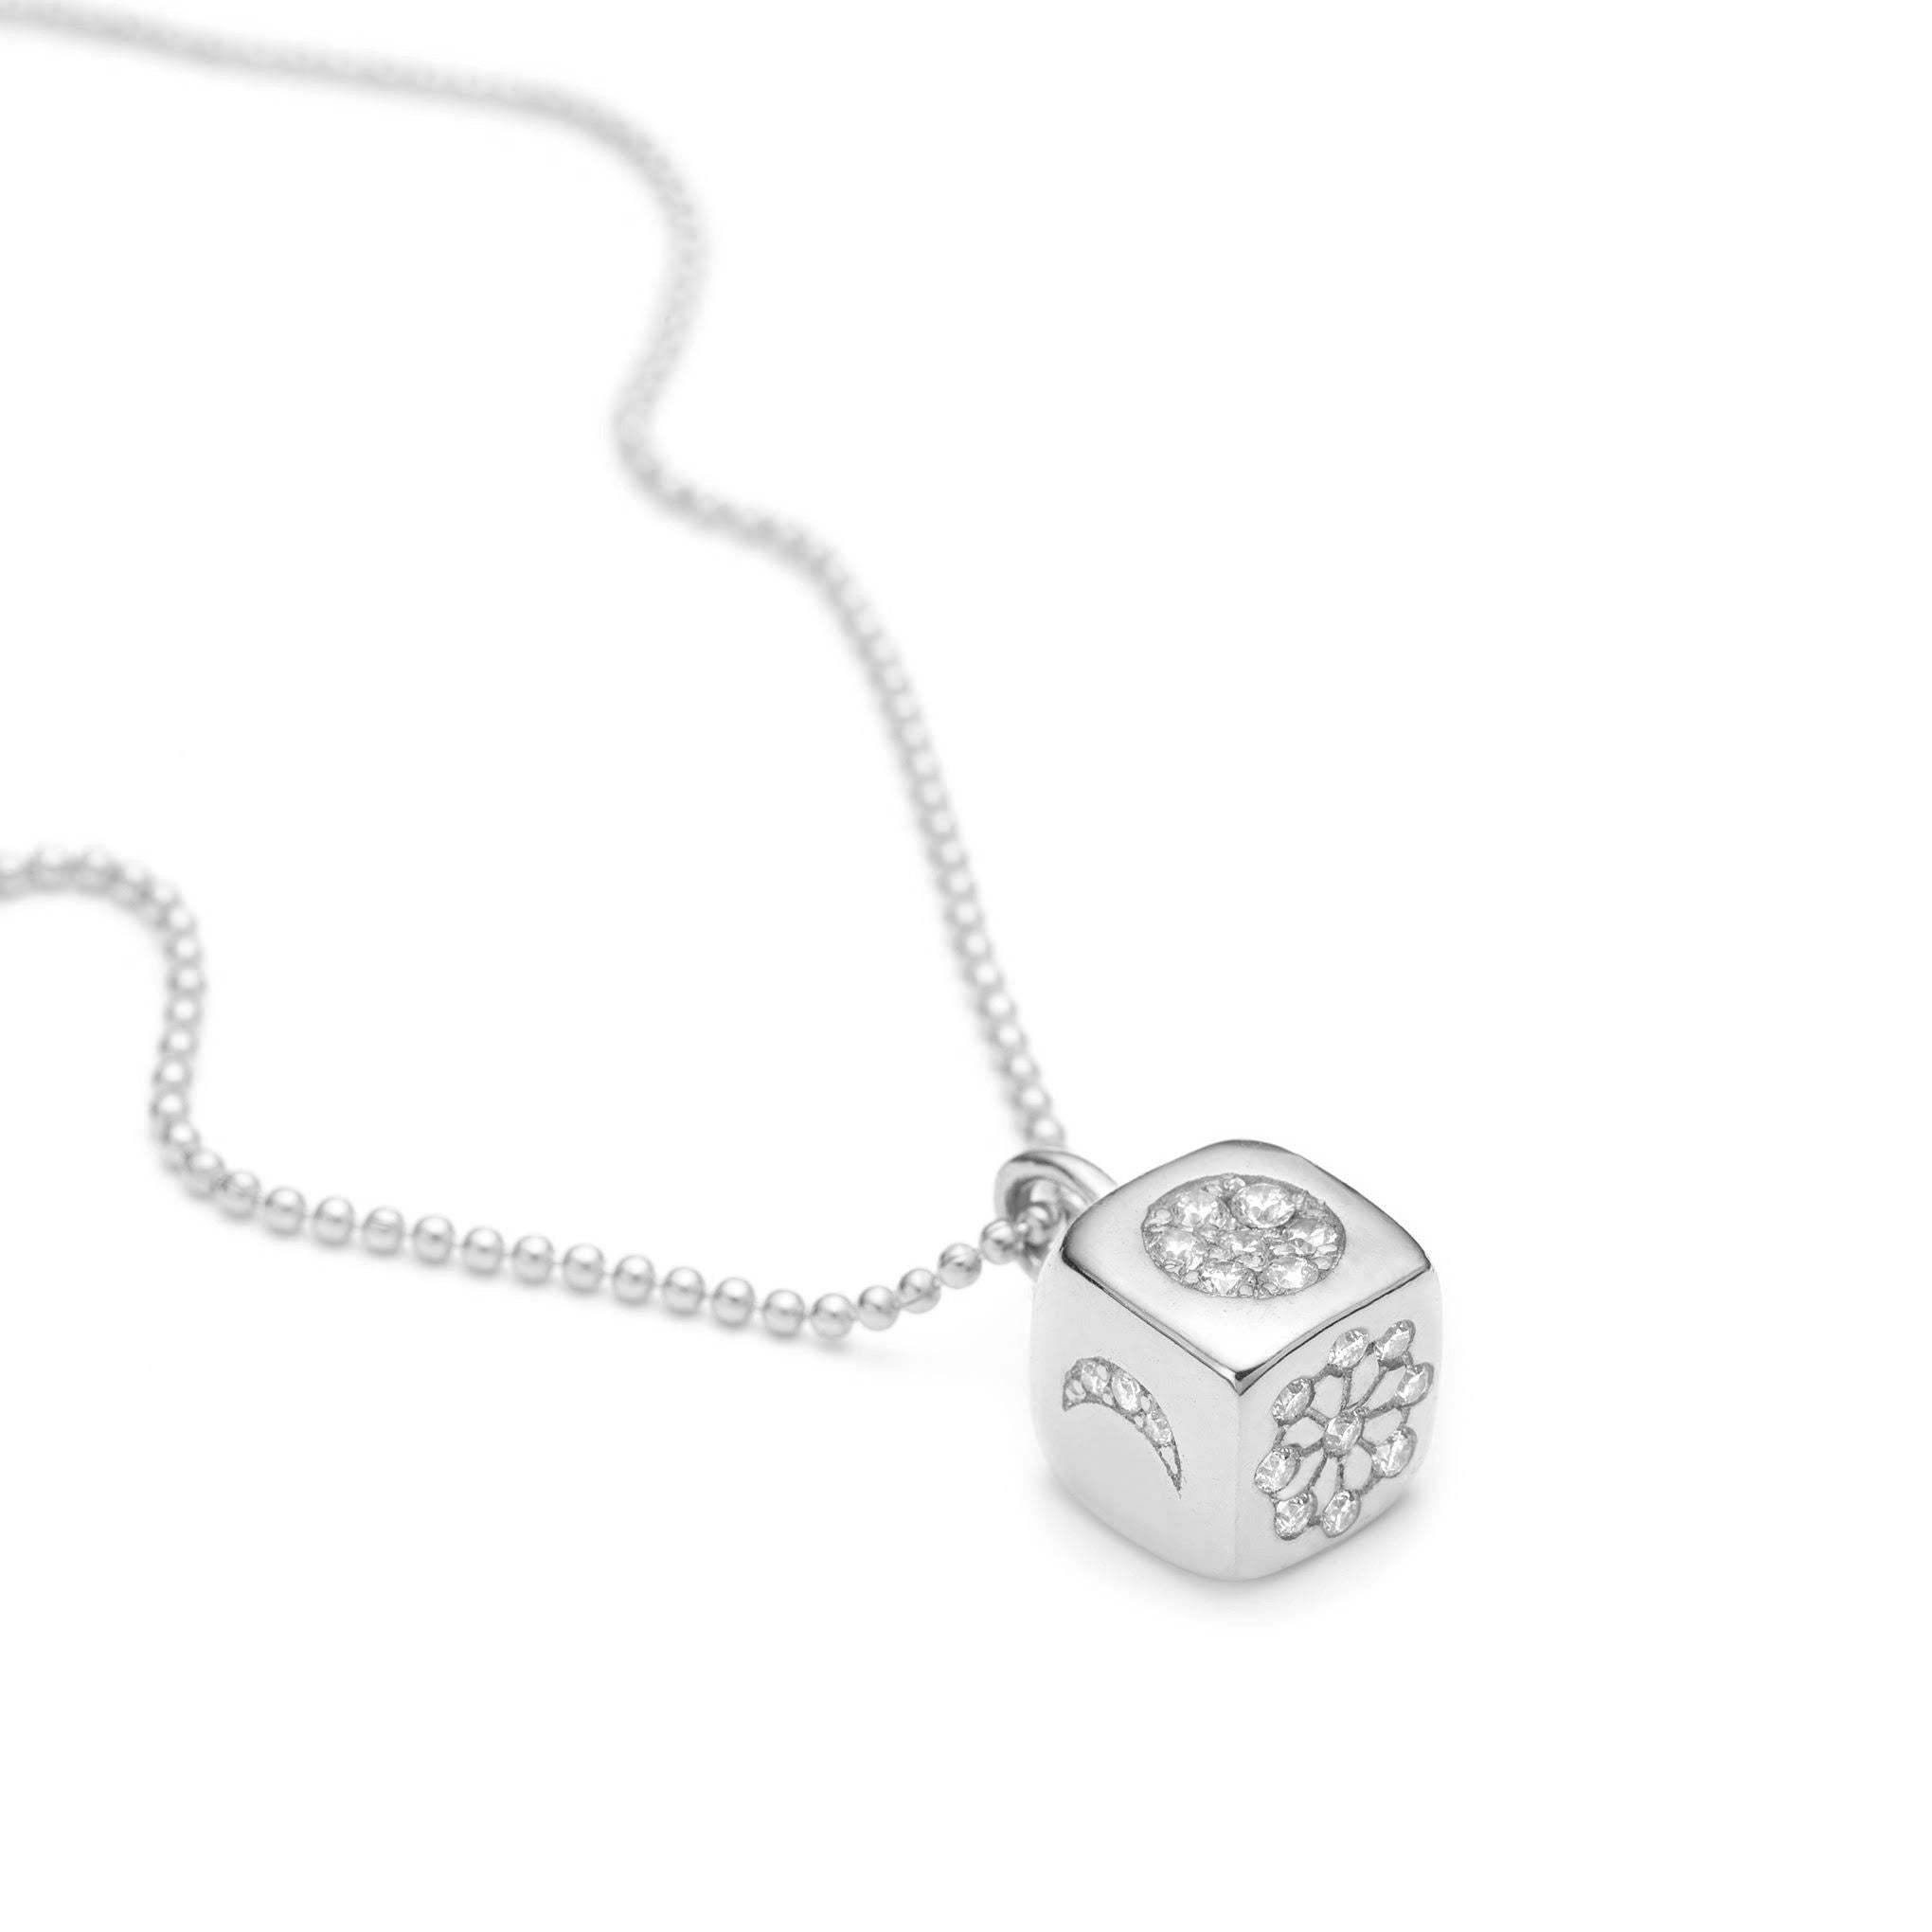 Prosperity Dice Necklace - With Love Darling